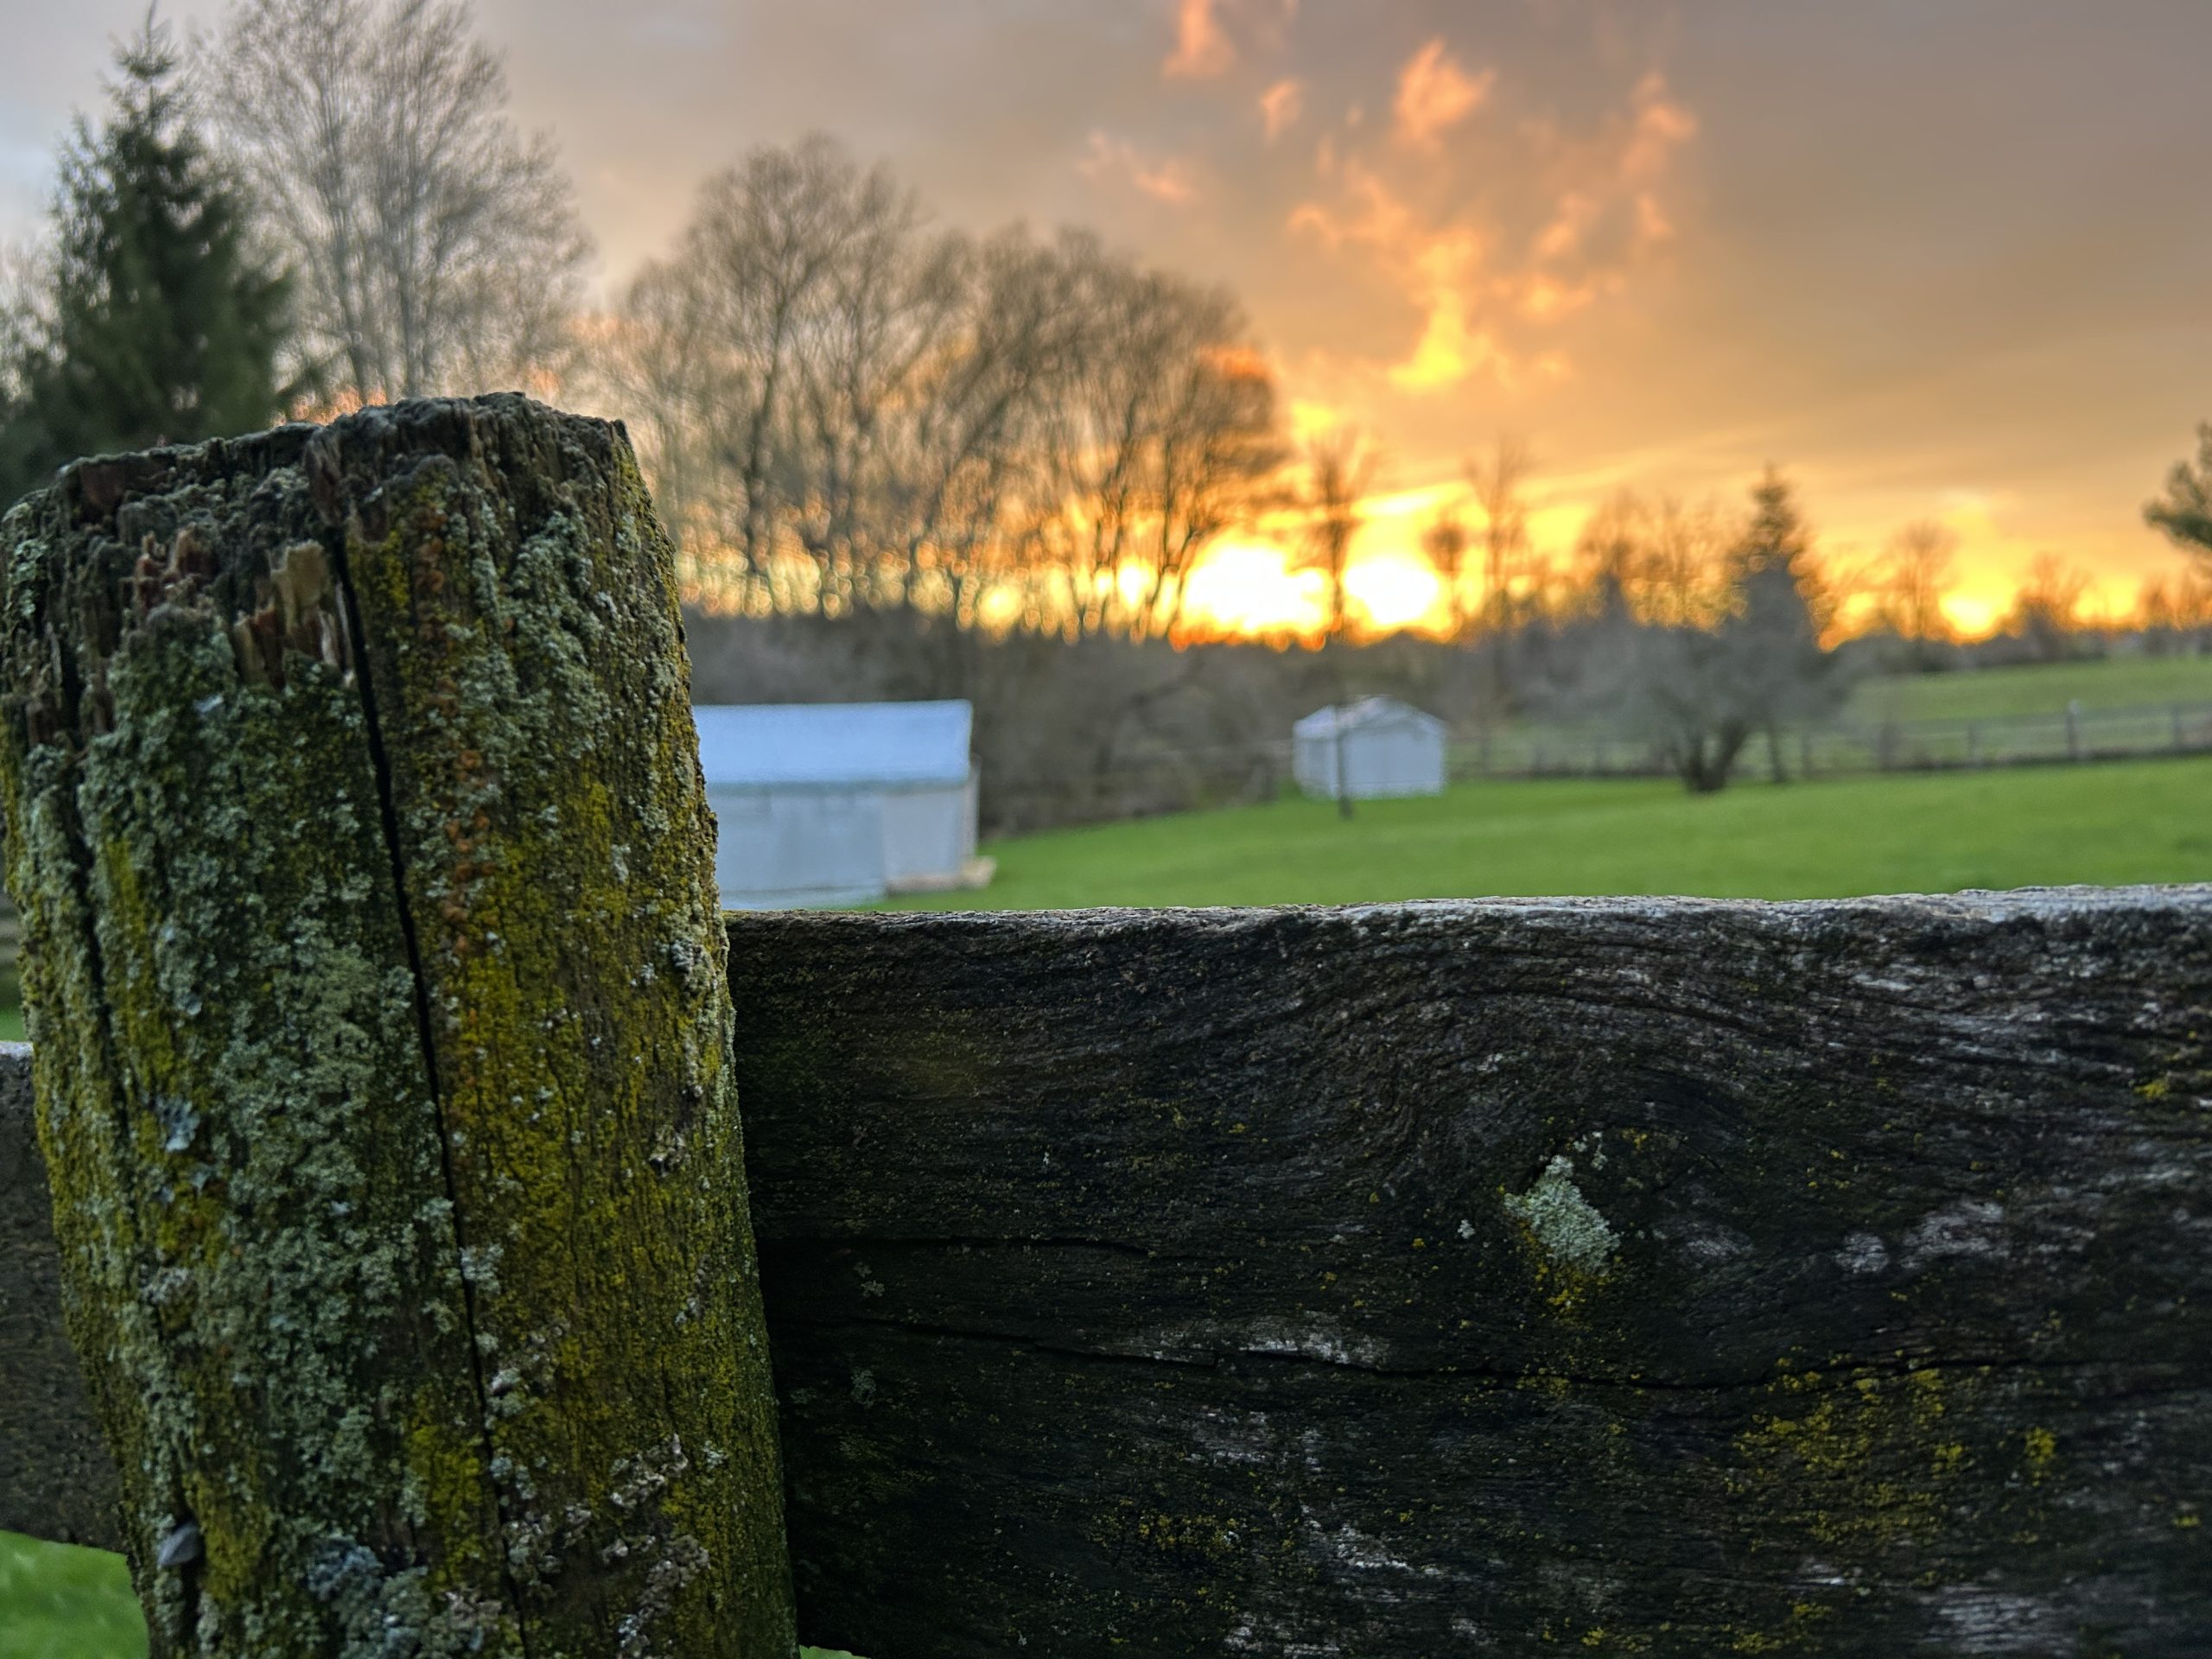 Sunset from the fence line overlooking glamping tents at Irvineside Farm